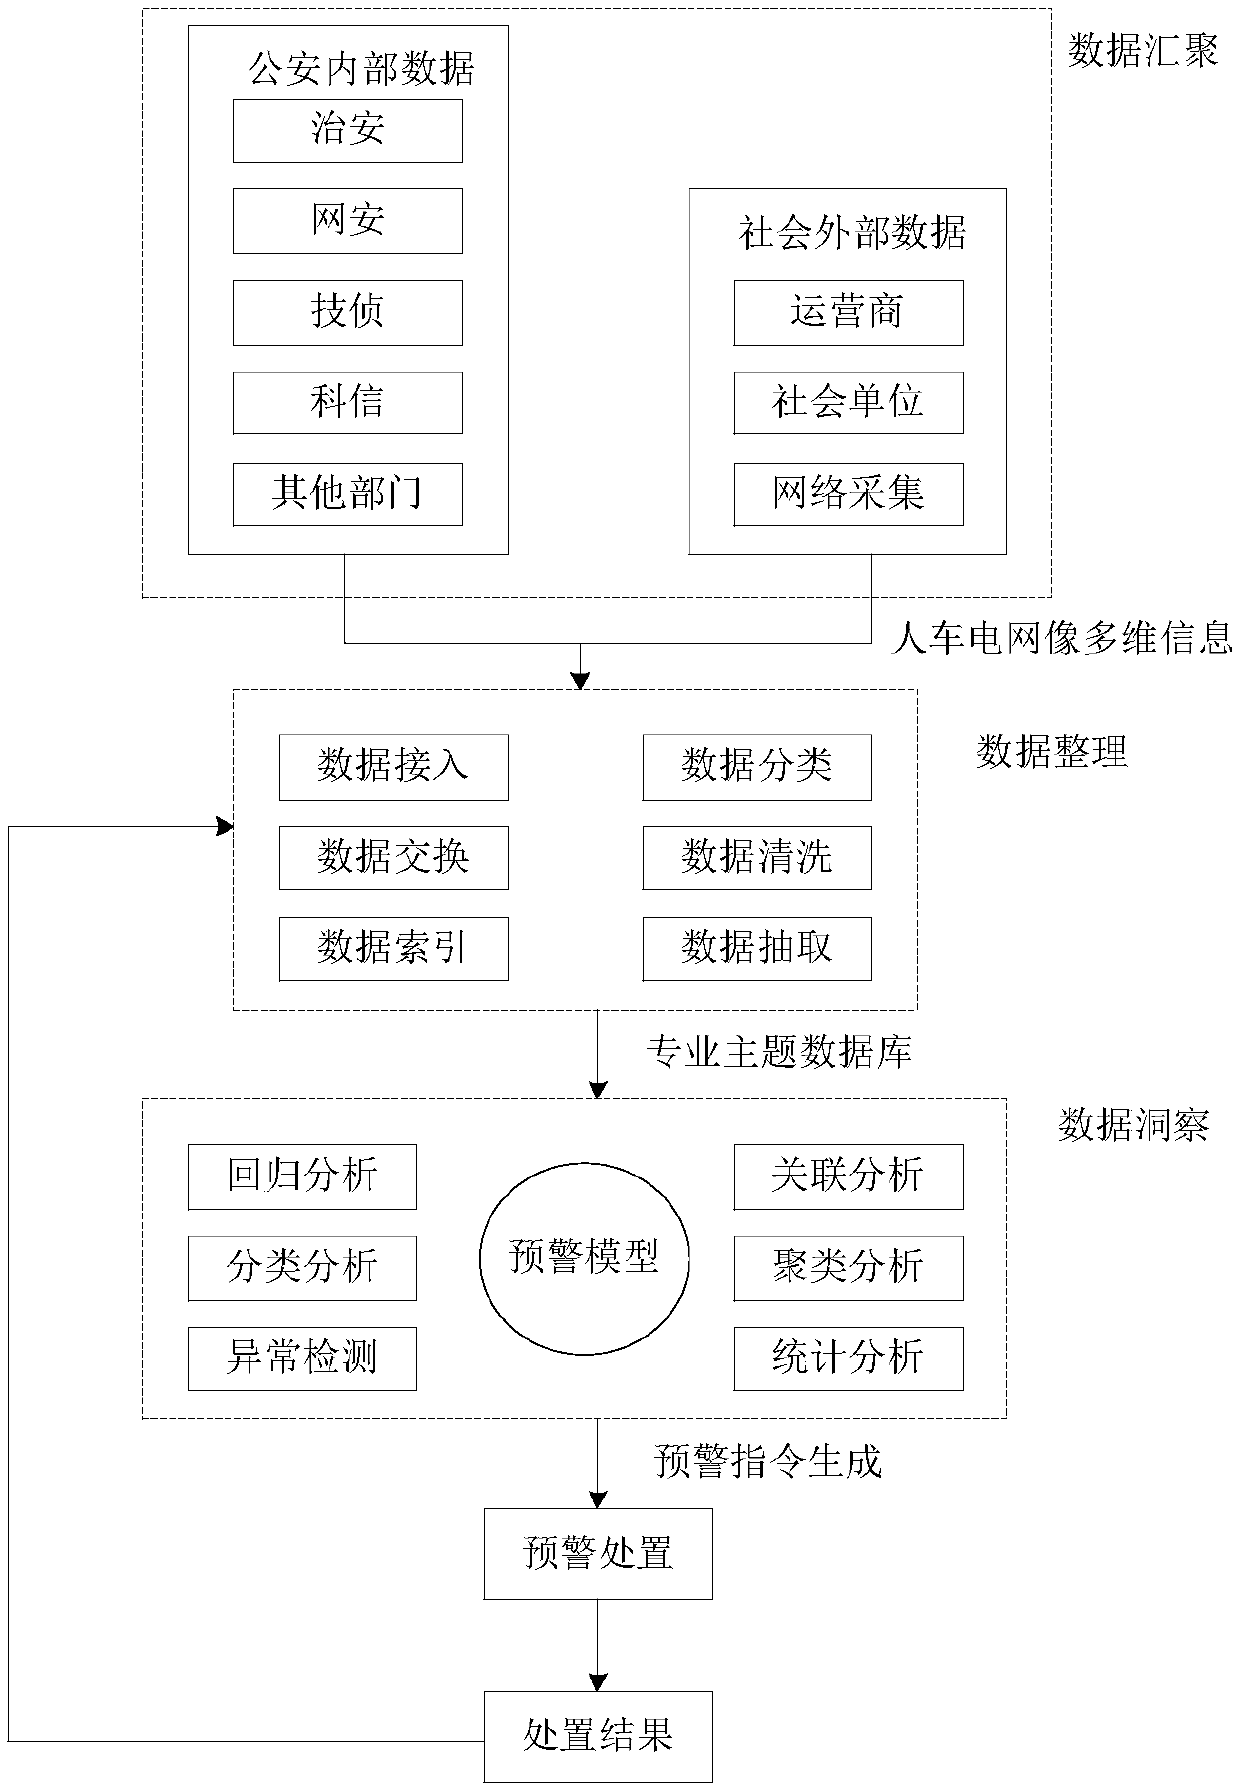 A personnel intelligent management and control method and system